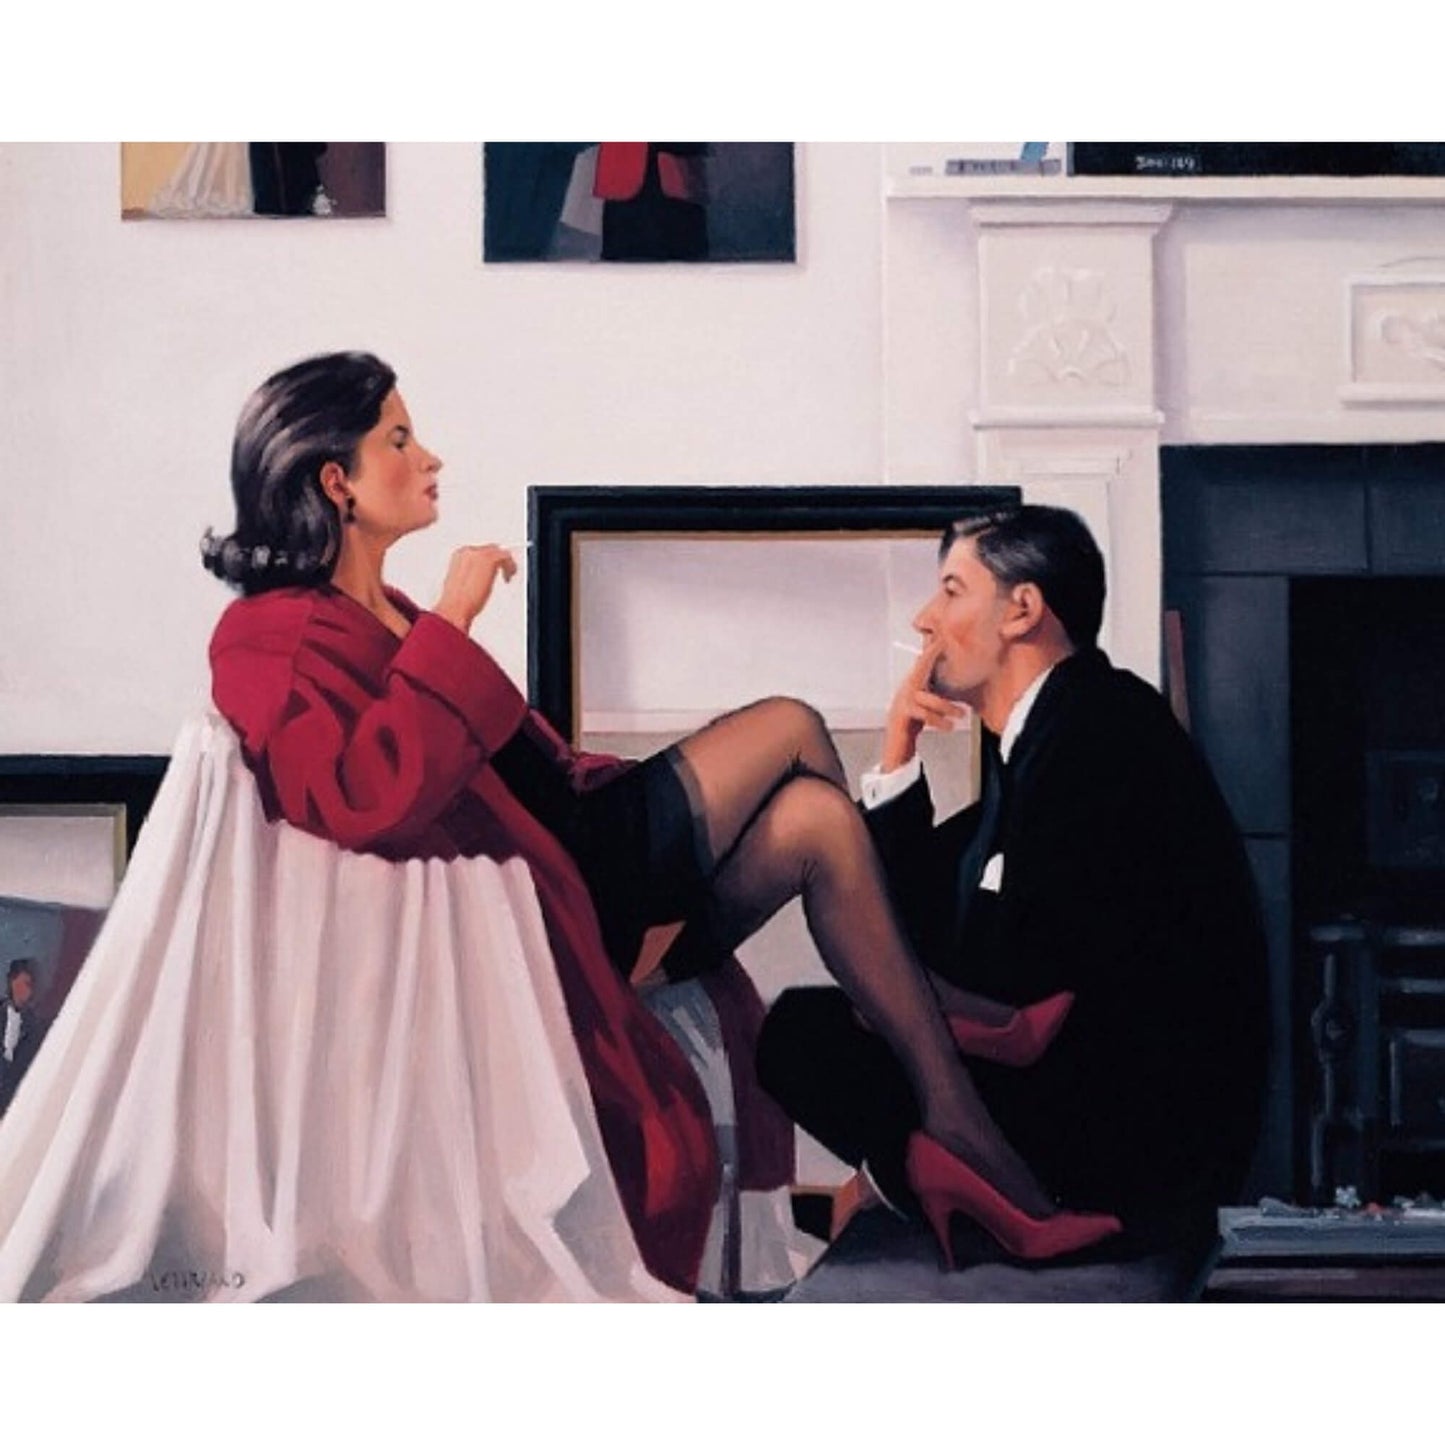 Models in the Studio - Limited Edition Print - Jack Vettriano